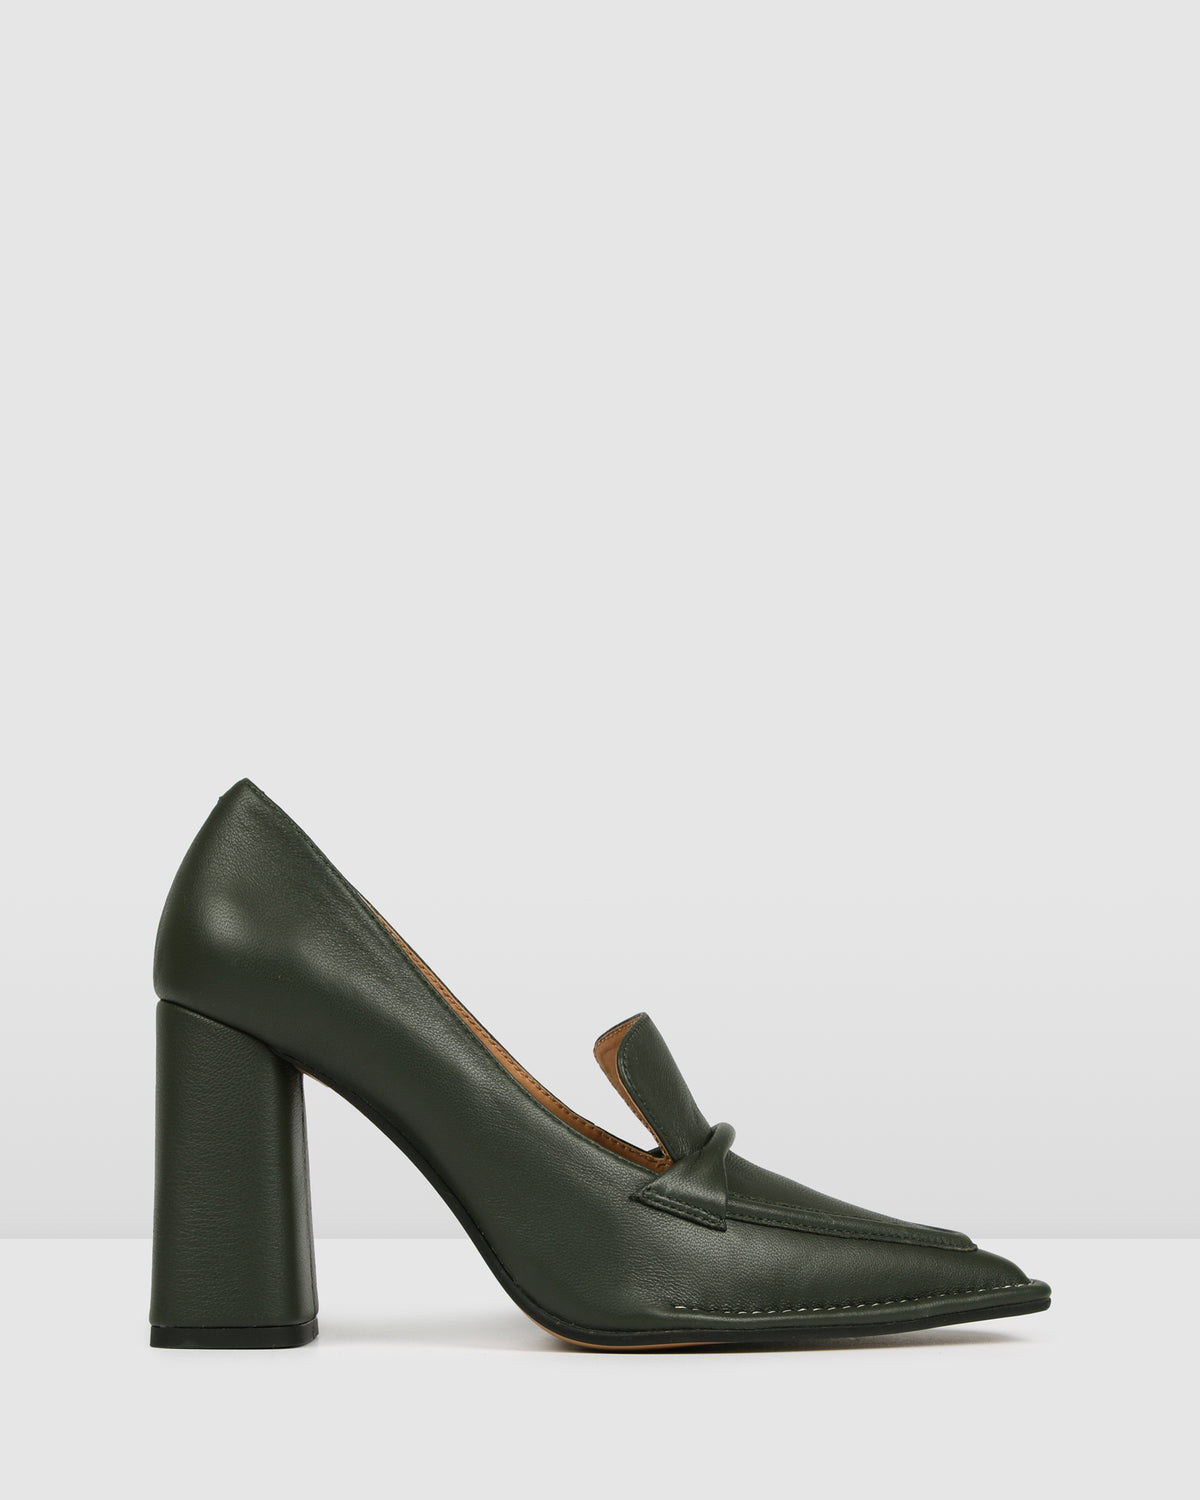 COVET HIGH HEELS OLIVE GREEN LEATHER